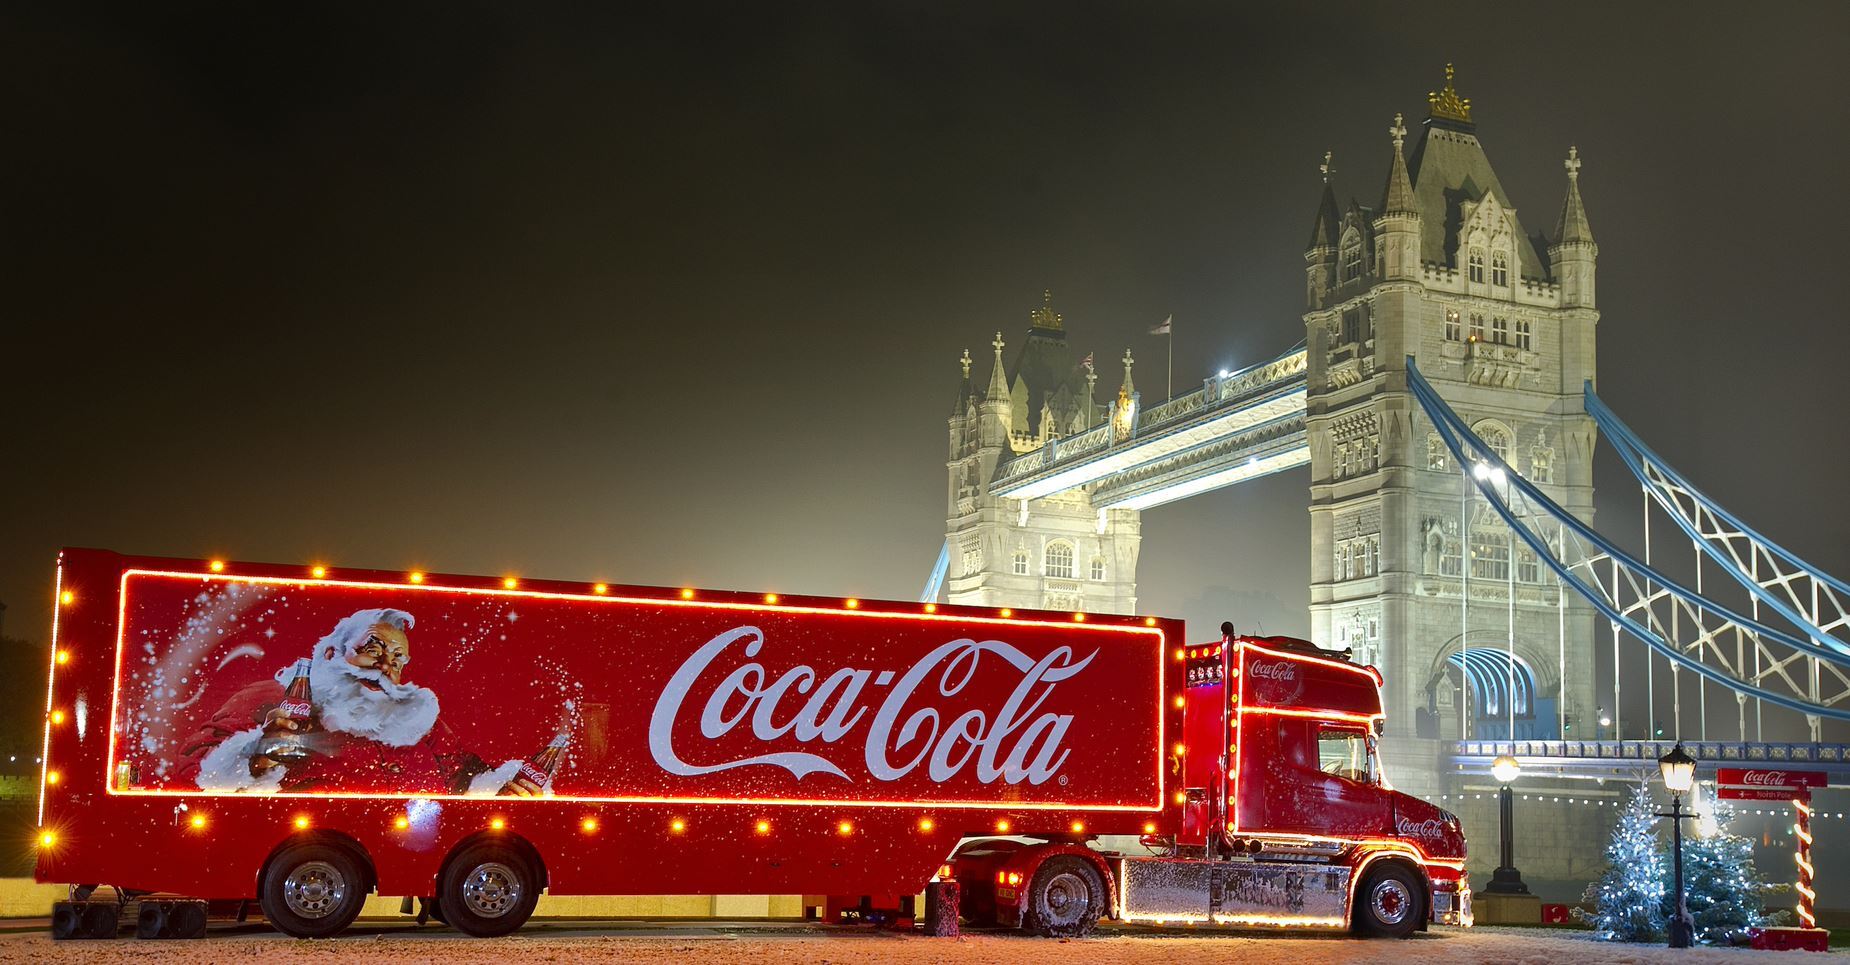 Coca-Cola brings Christmas magic to the nation